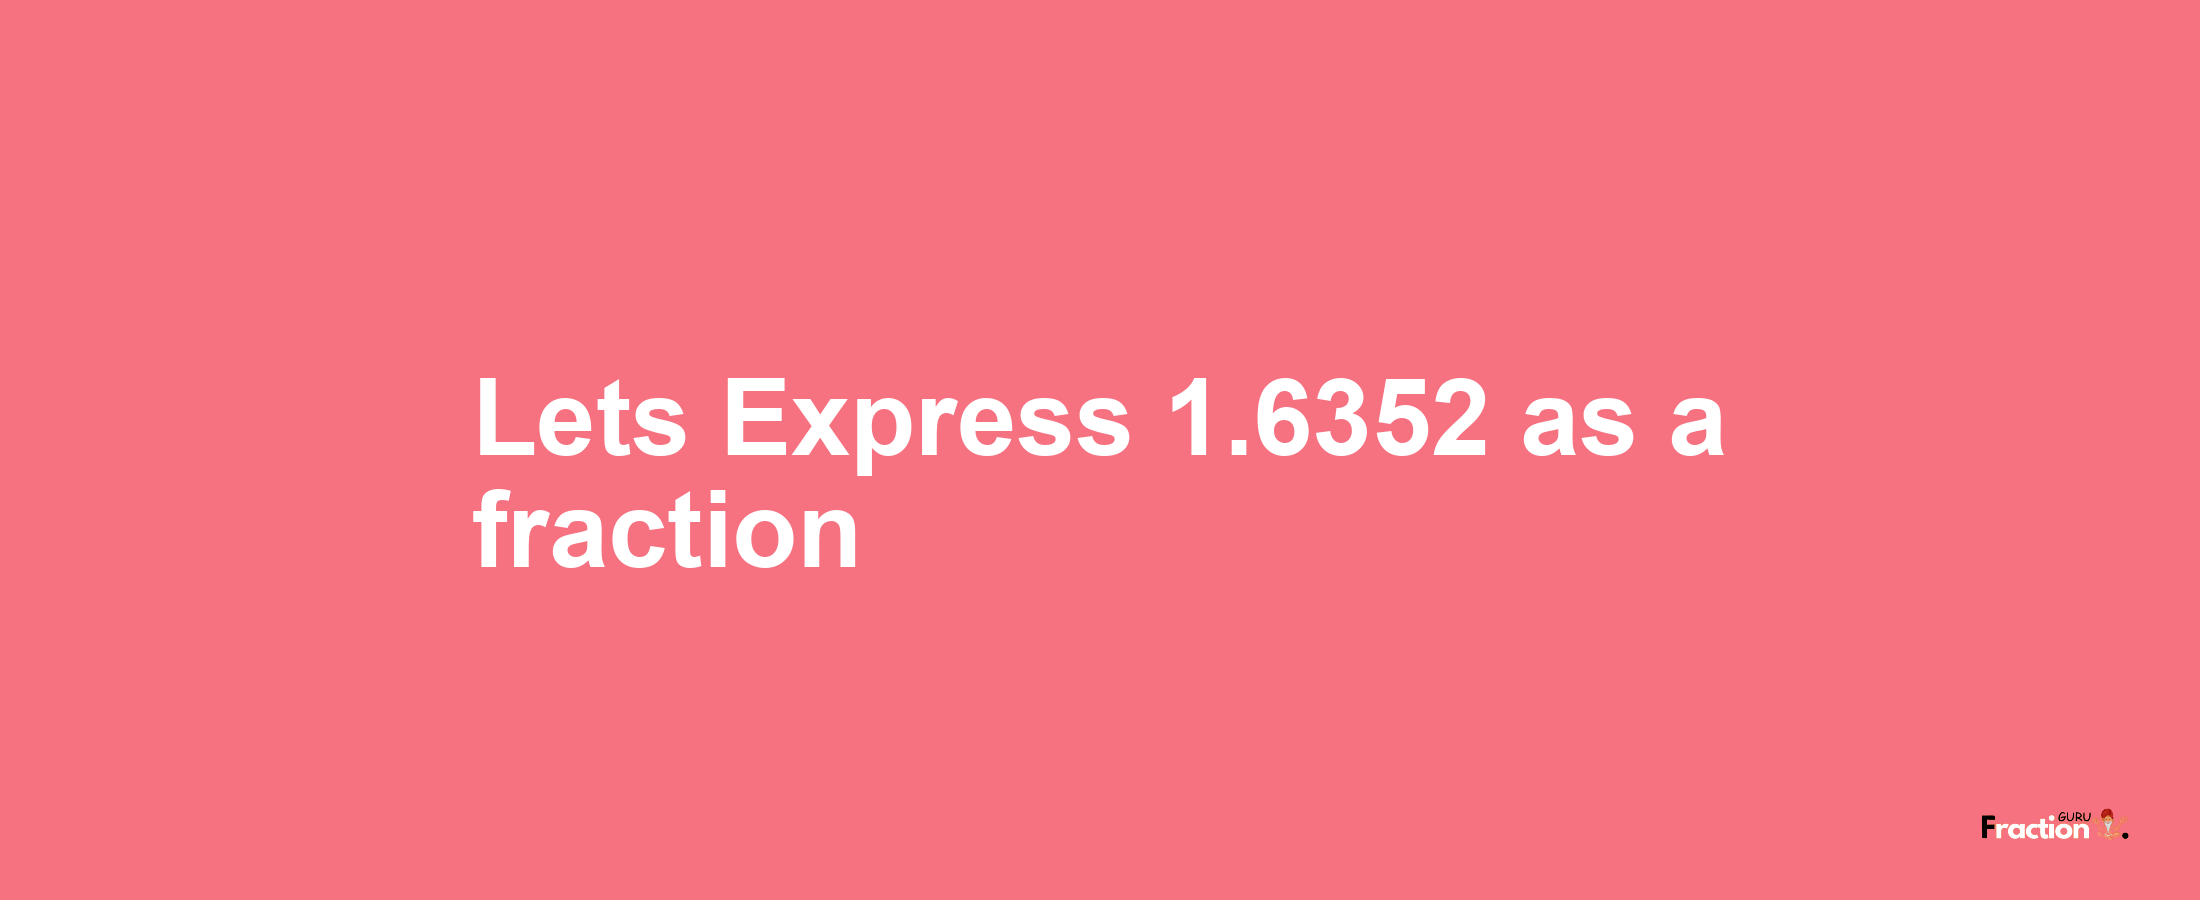 Lets Express 1.6352 as afraction